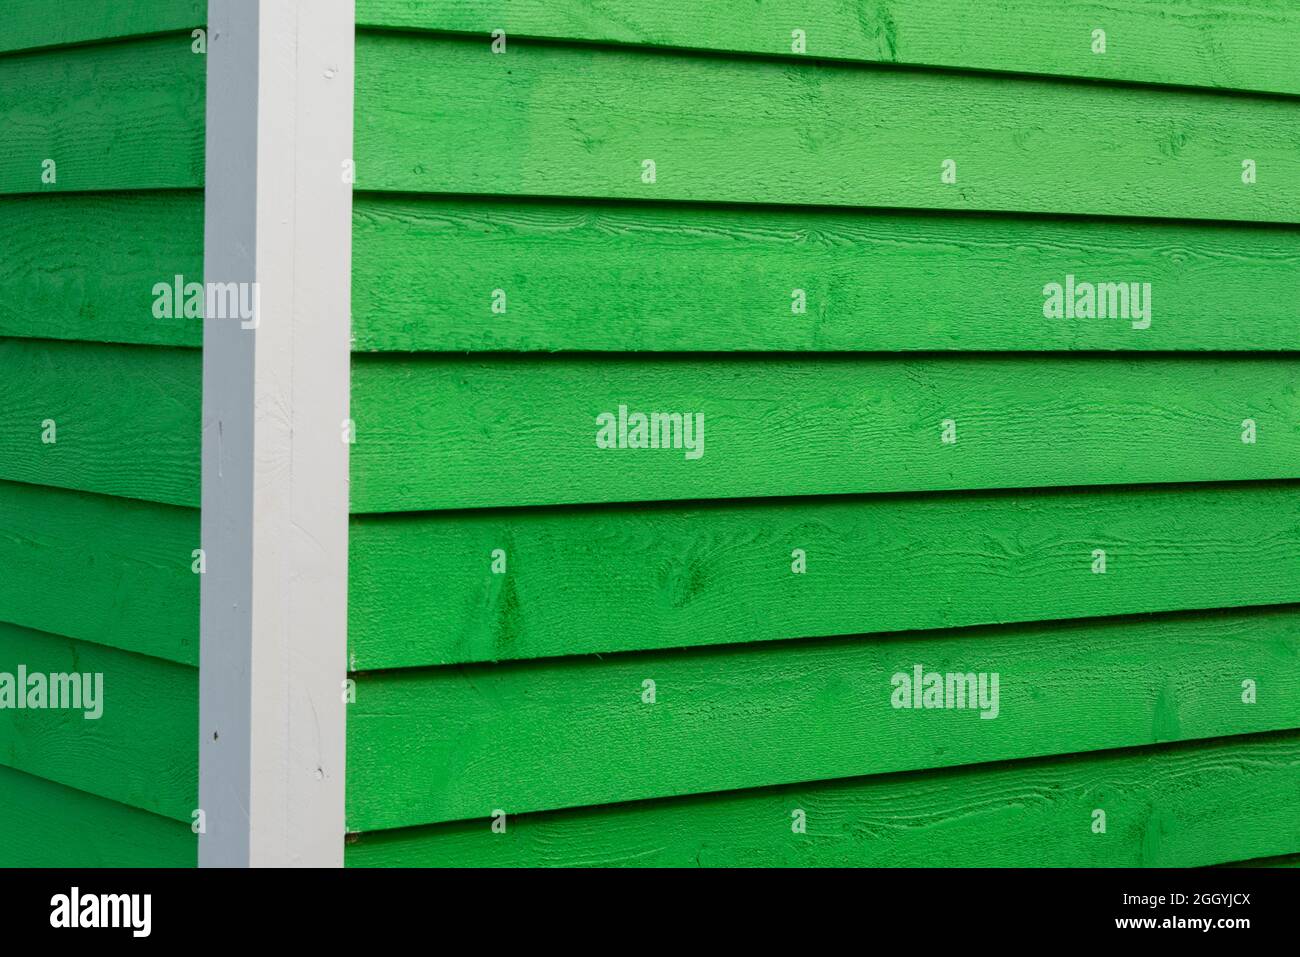 The exterior of a vibrant green narrow wooden horizontal clapboard wall of a house. The trim on the building is white in color. Stock Photo